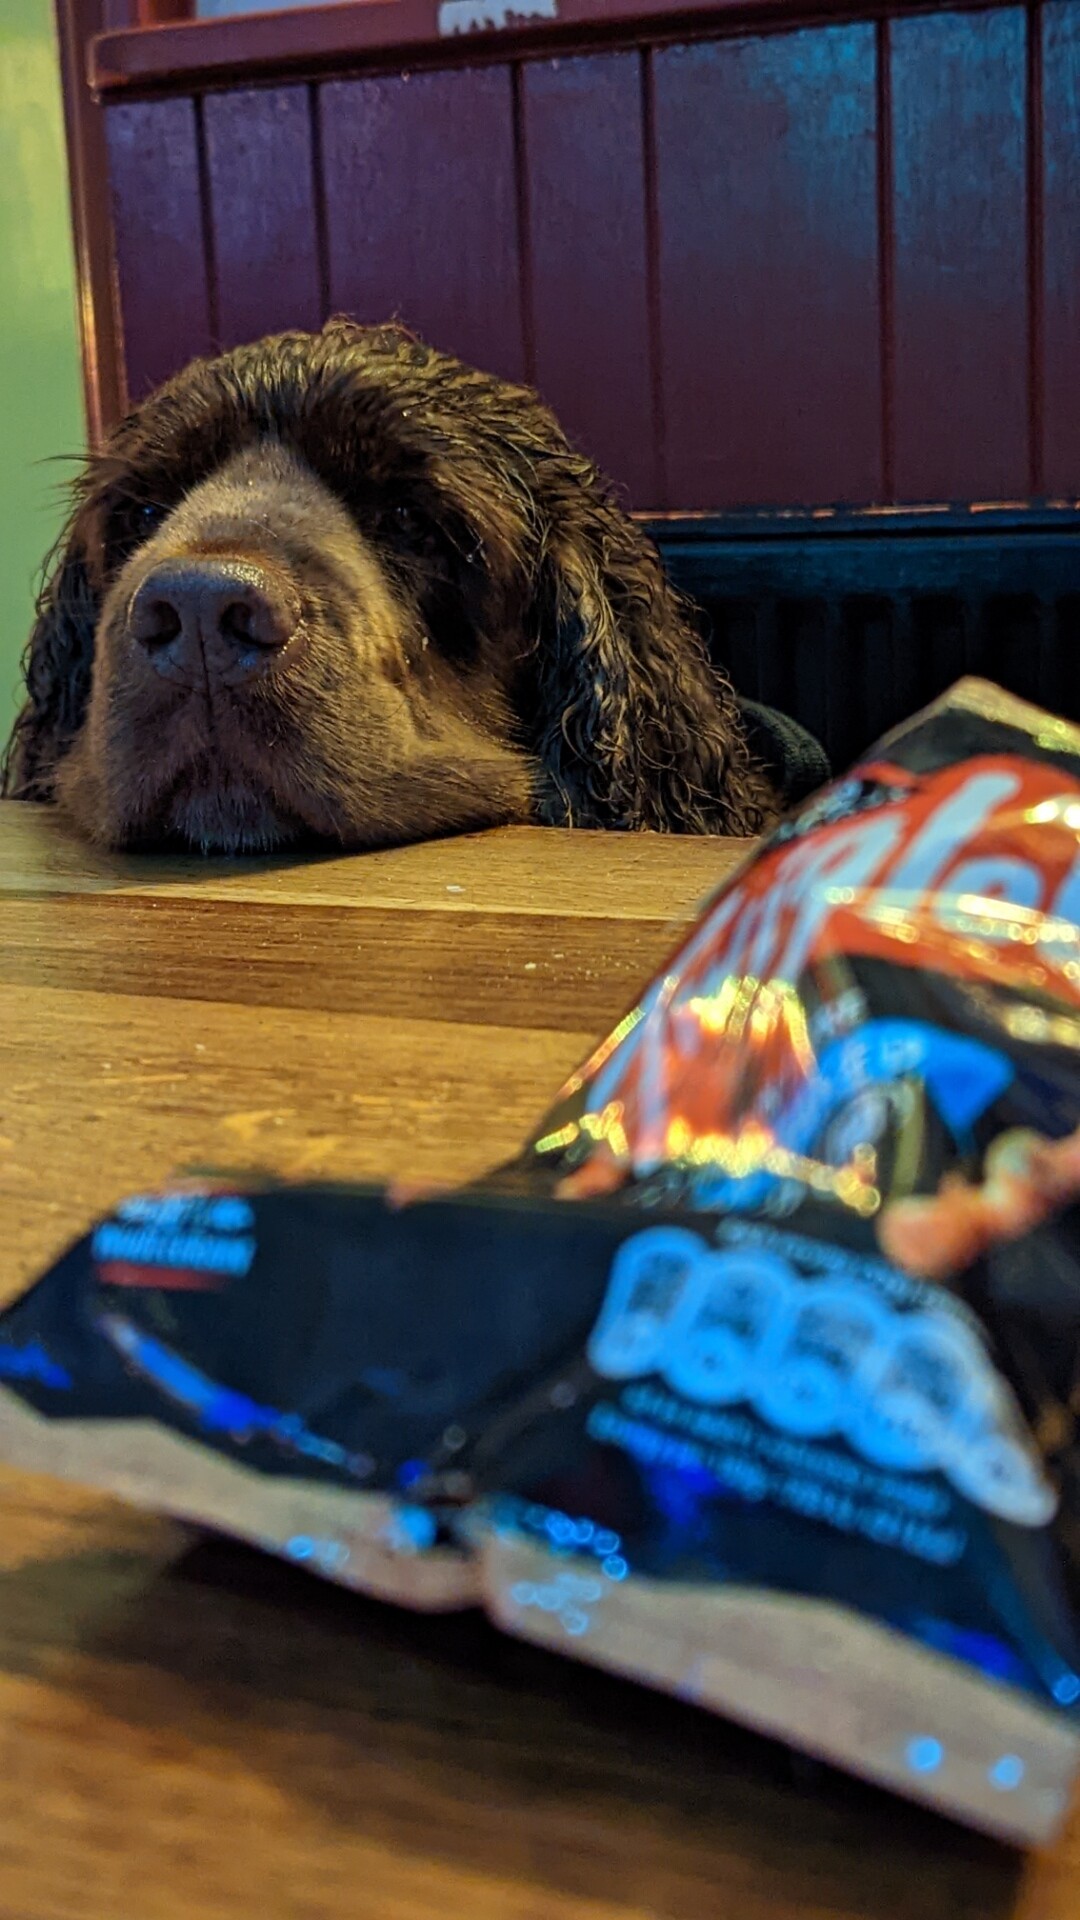 A Sussex Spaniel resting it's chin on a pub table with a packet of Twiglets crisps that are blurred in the foreground.